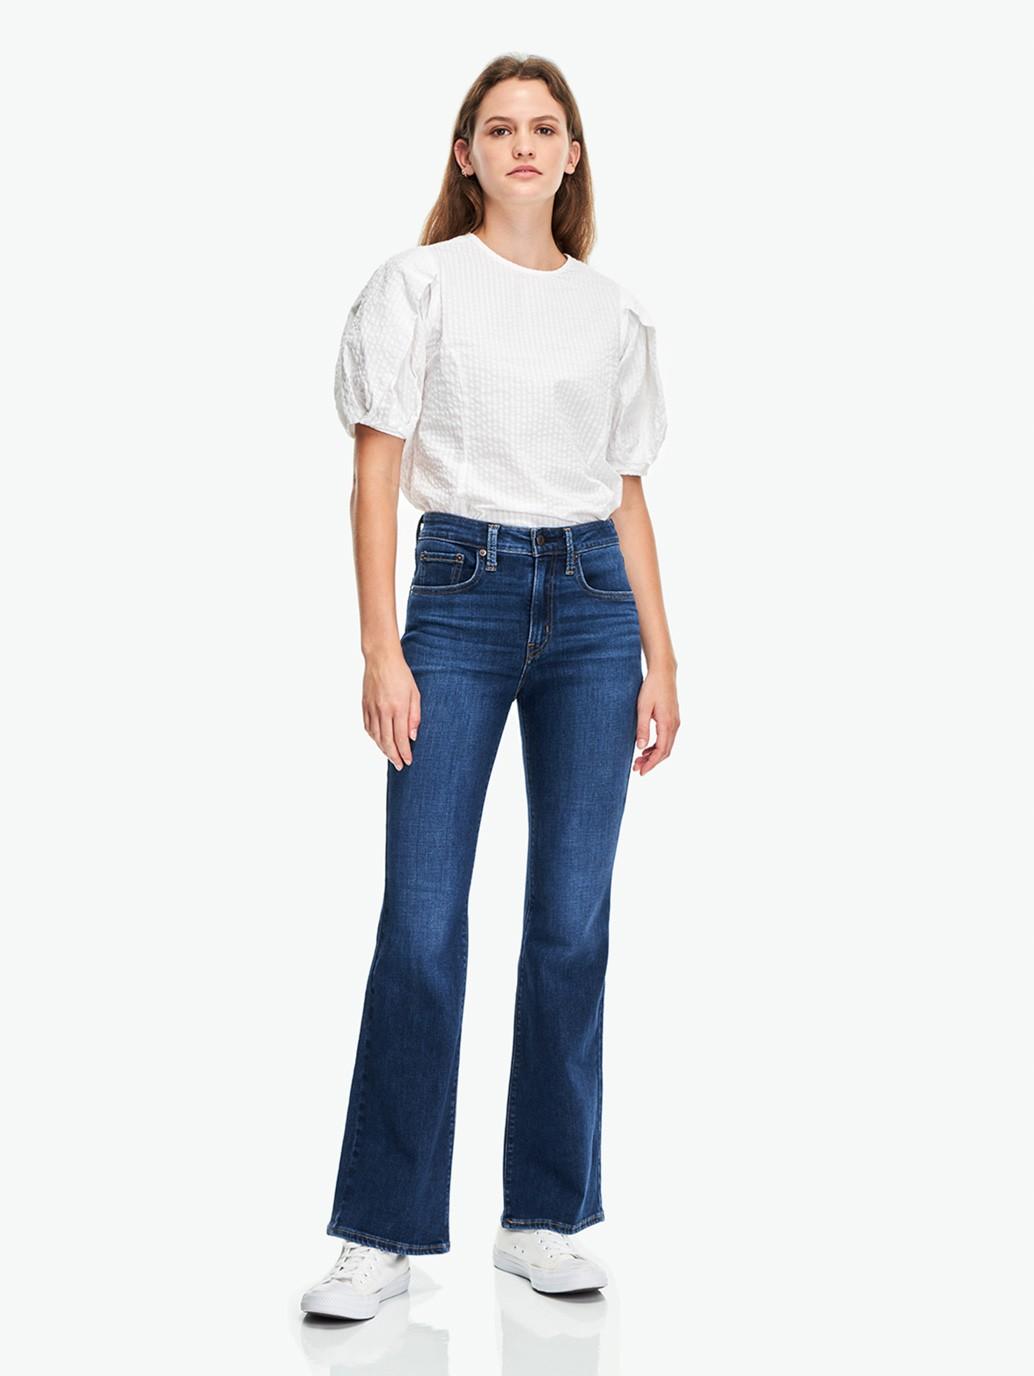 Buy Levi’s® Women's 726 High-Rise Flare Jeans| Levi’s® Official Online ...